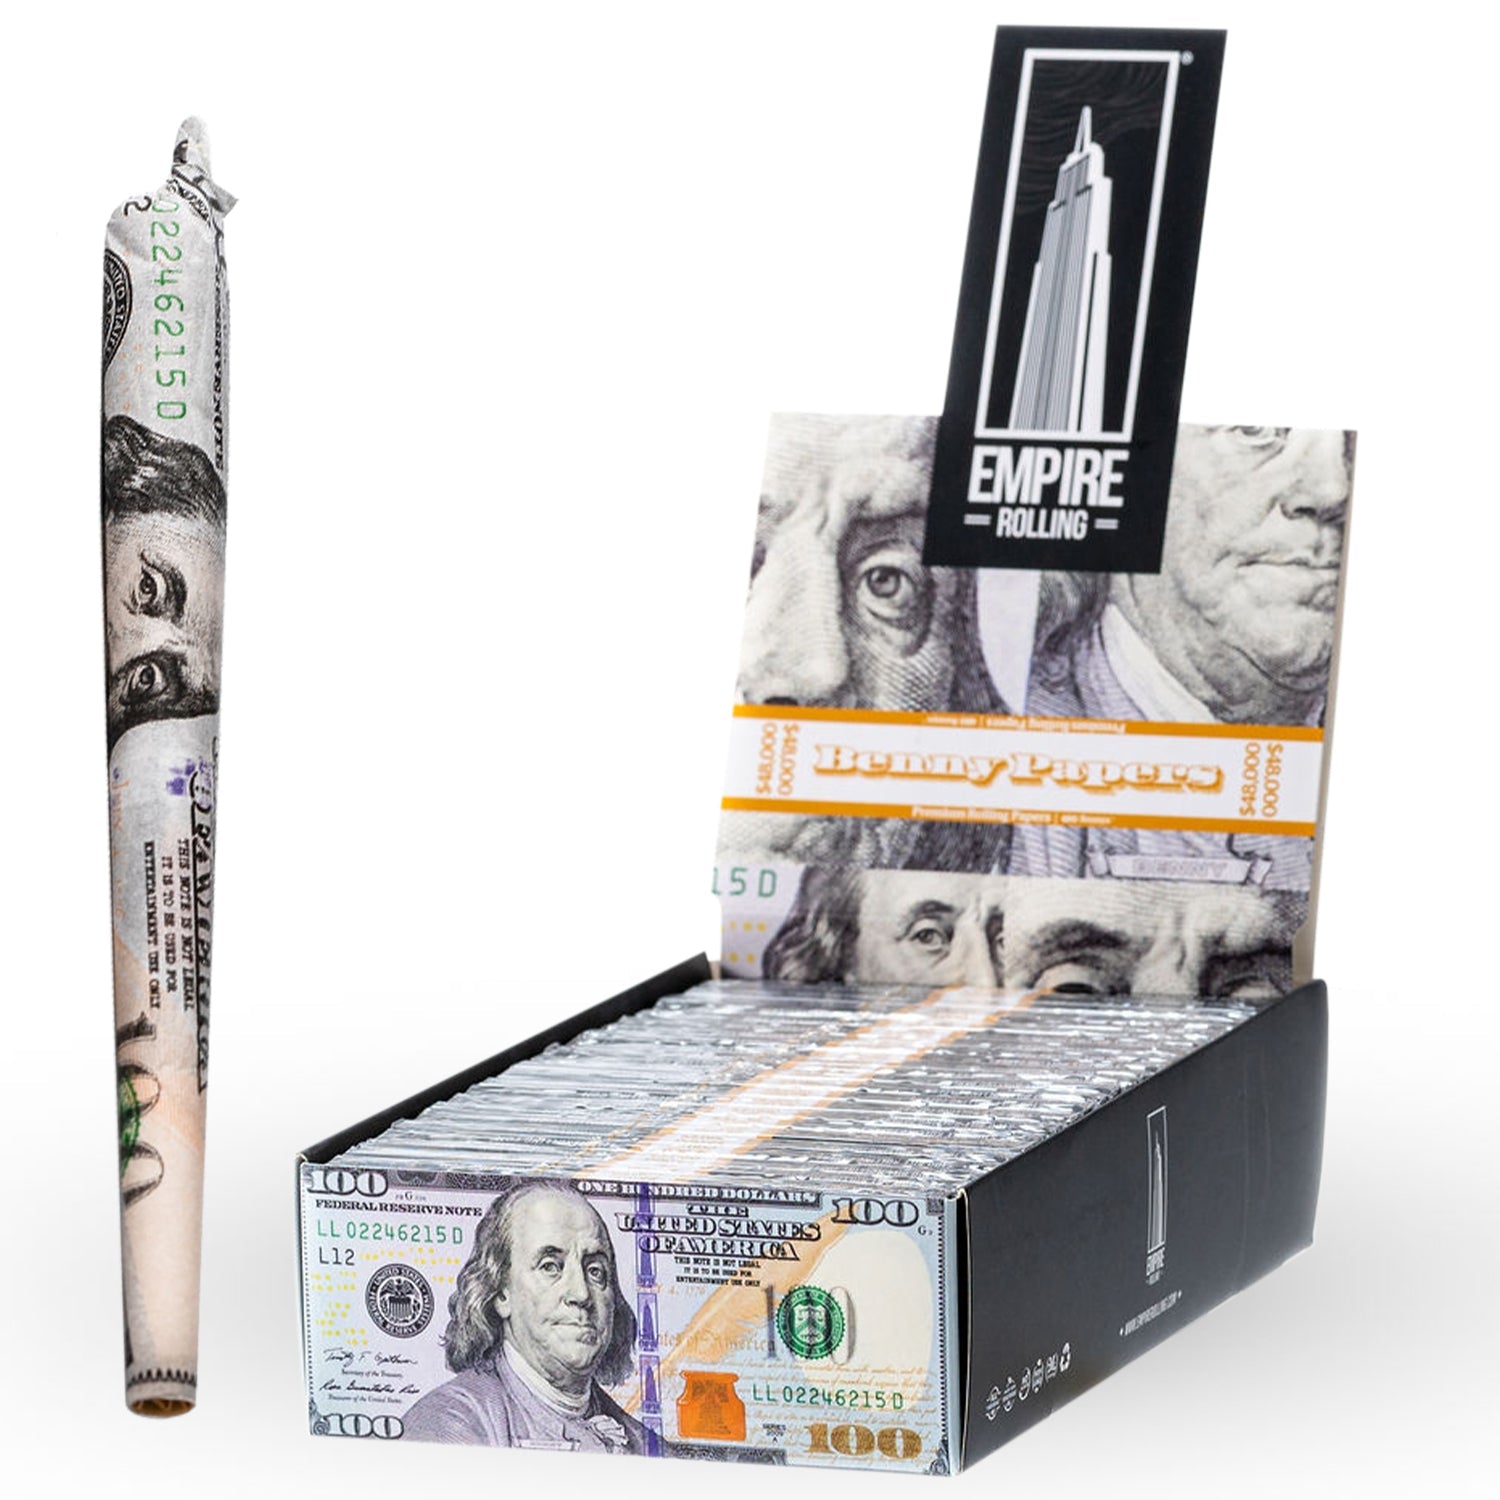 Empire Rolling's King Size Organic Hemp Rolling Papers, eco-friendly and crafted with high-quality, natural materials for a premium smoking experience.BENNY OG Papers - Empire Rolling Papers